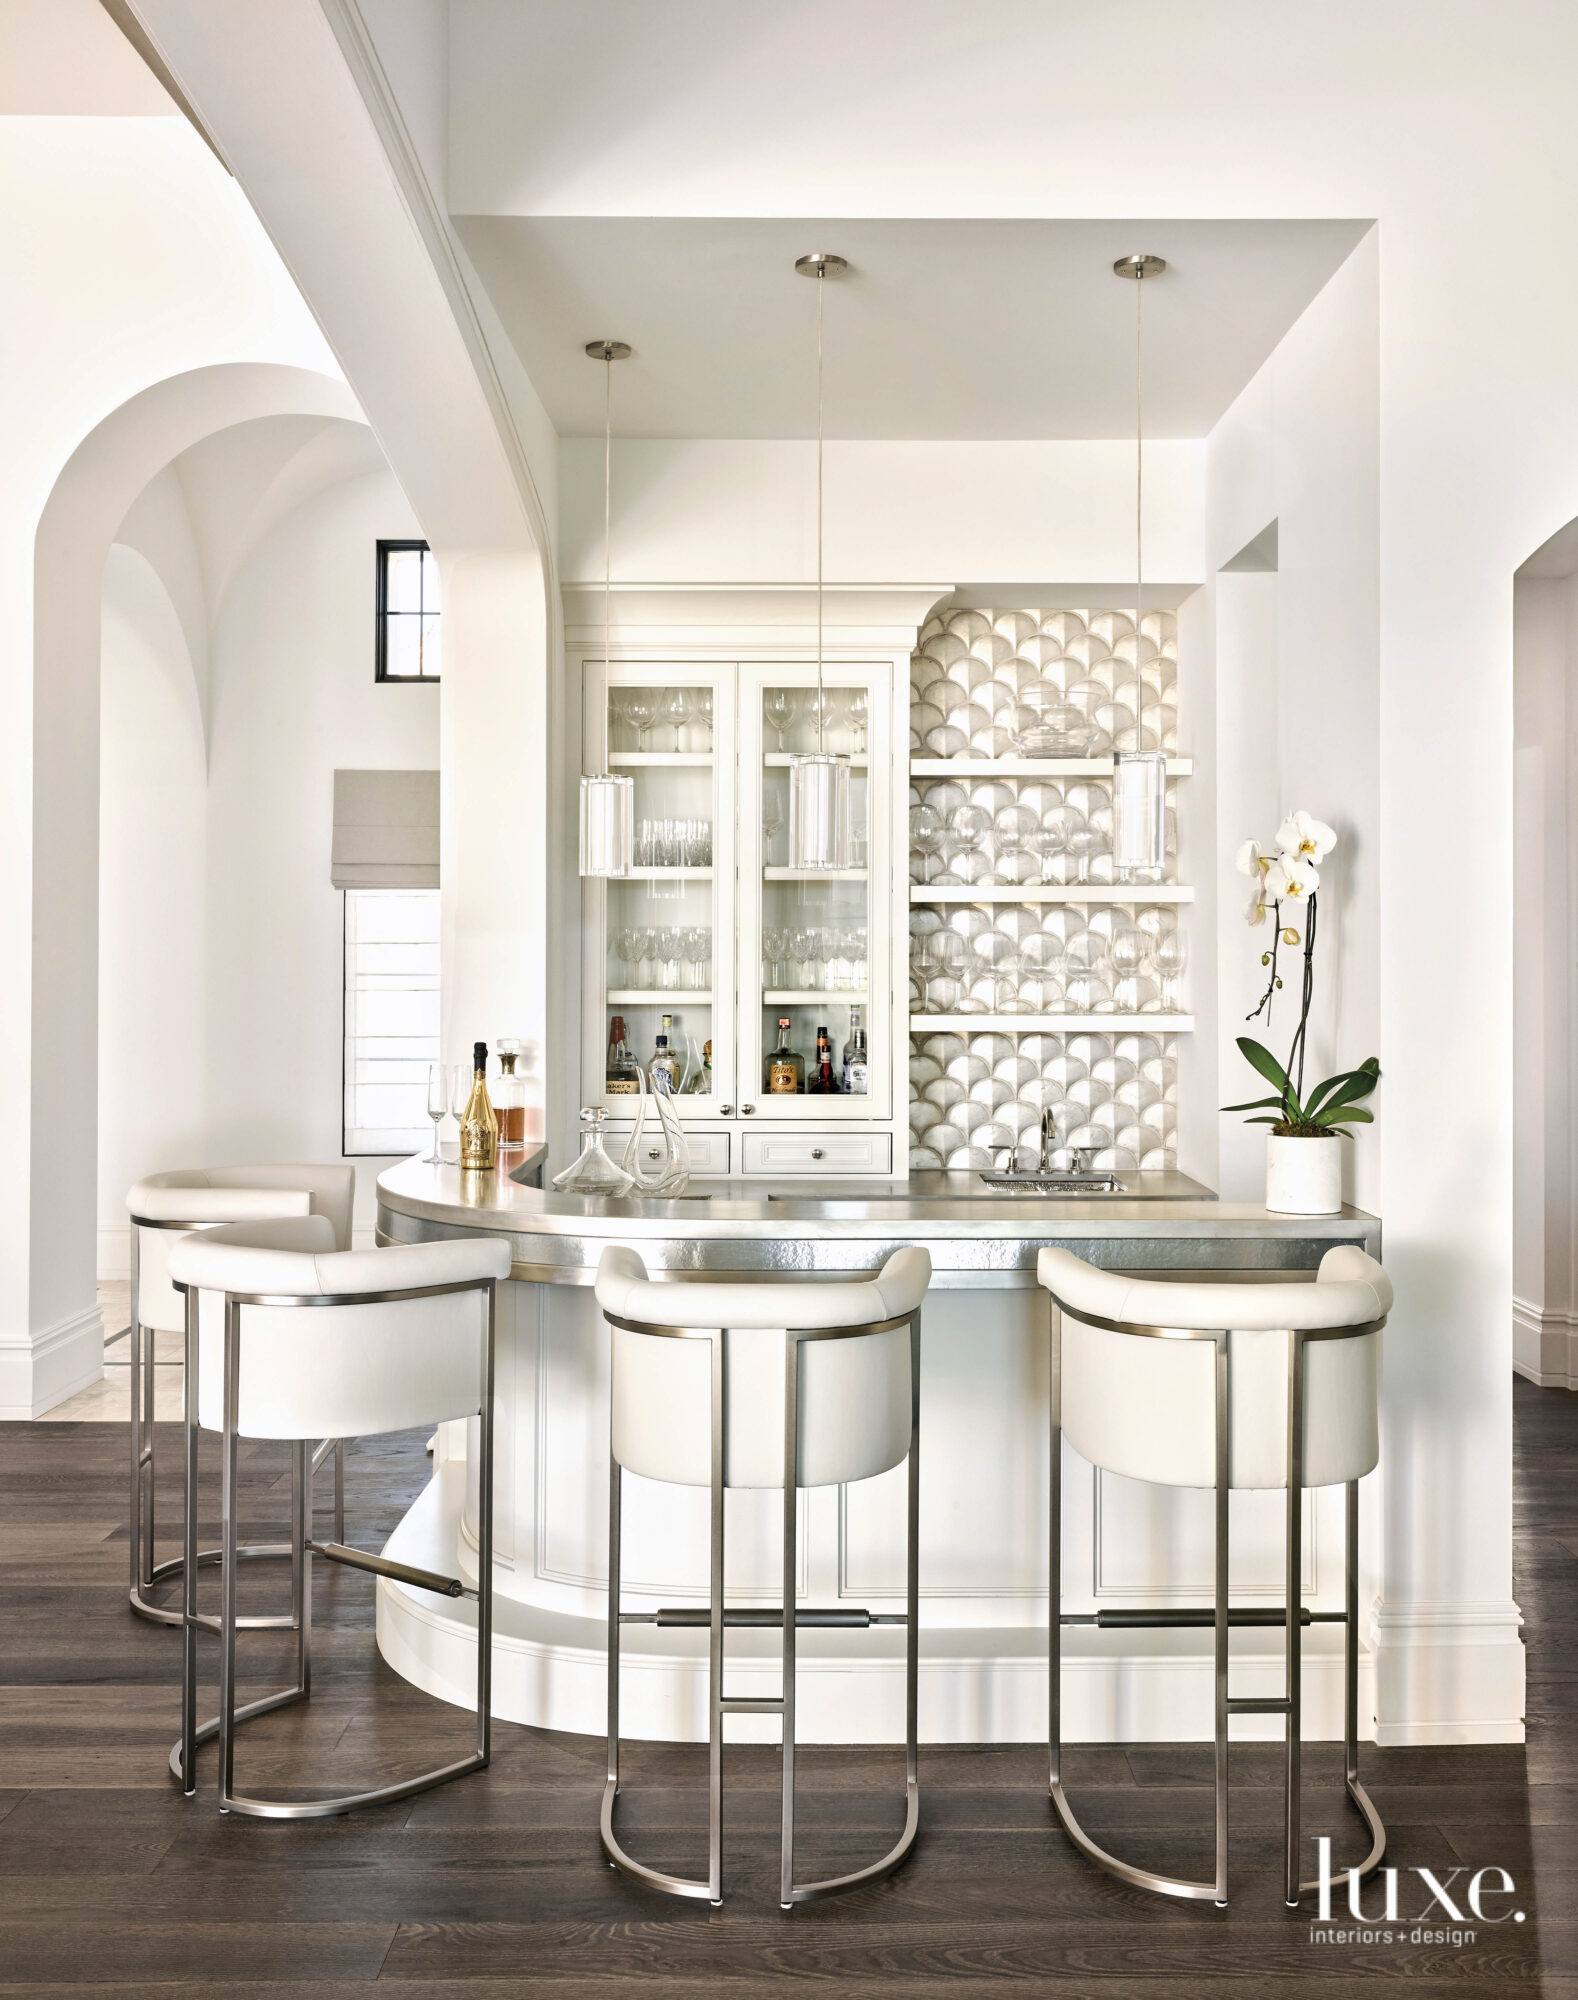 The all-white bar area has custom millwork and upholstered stools.